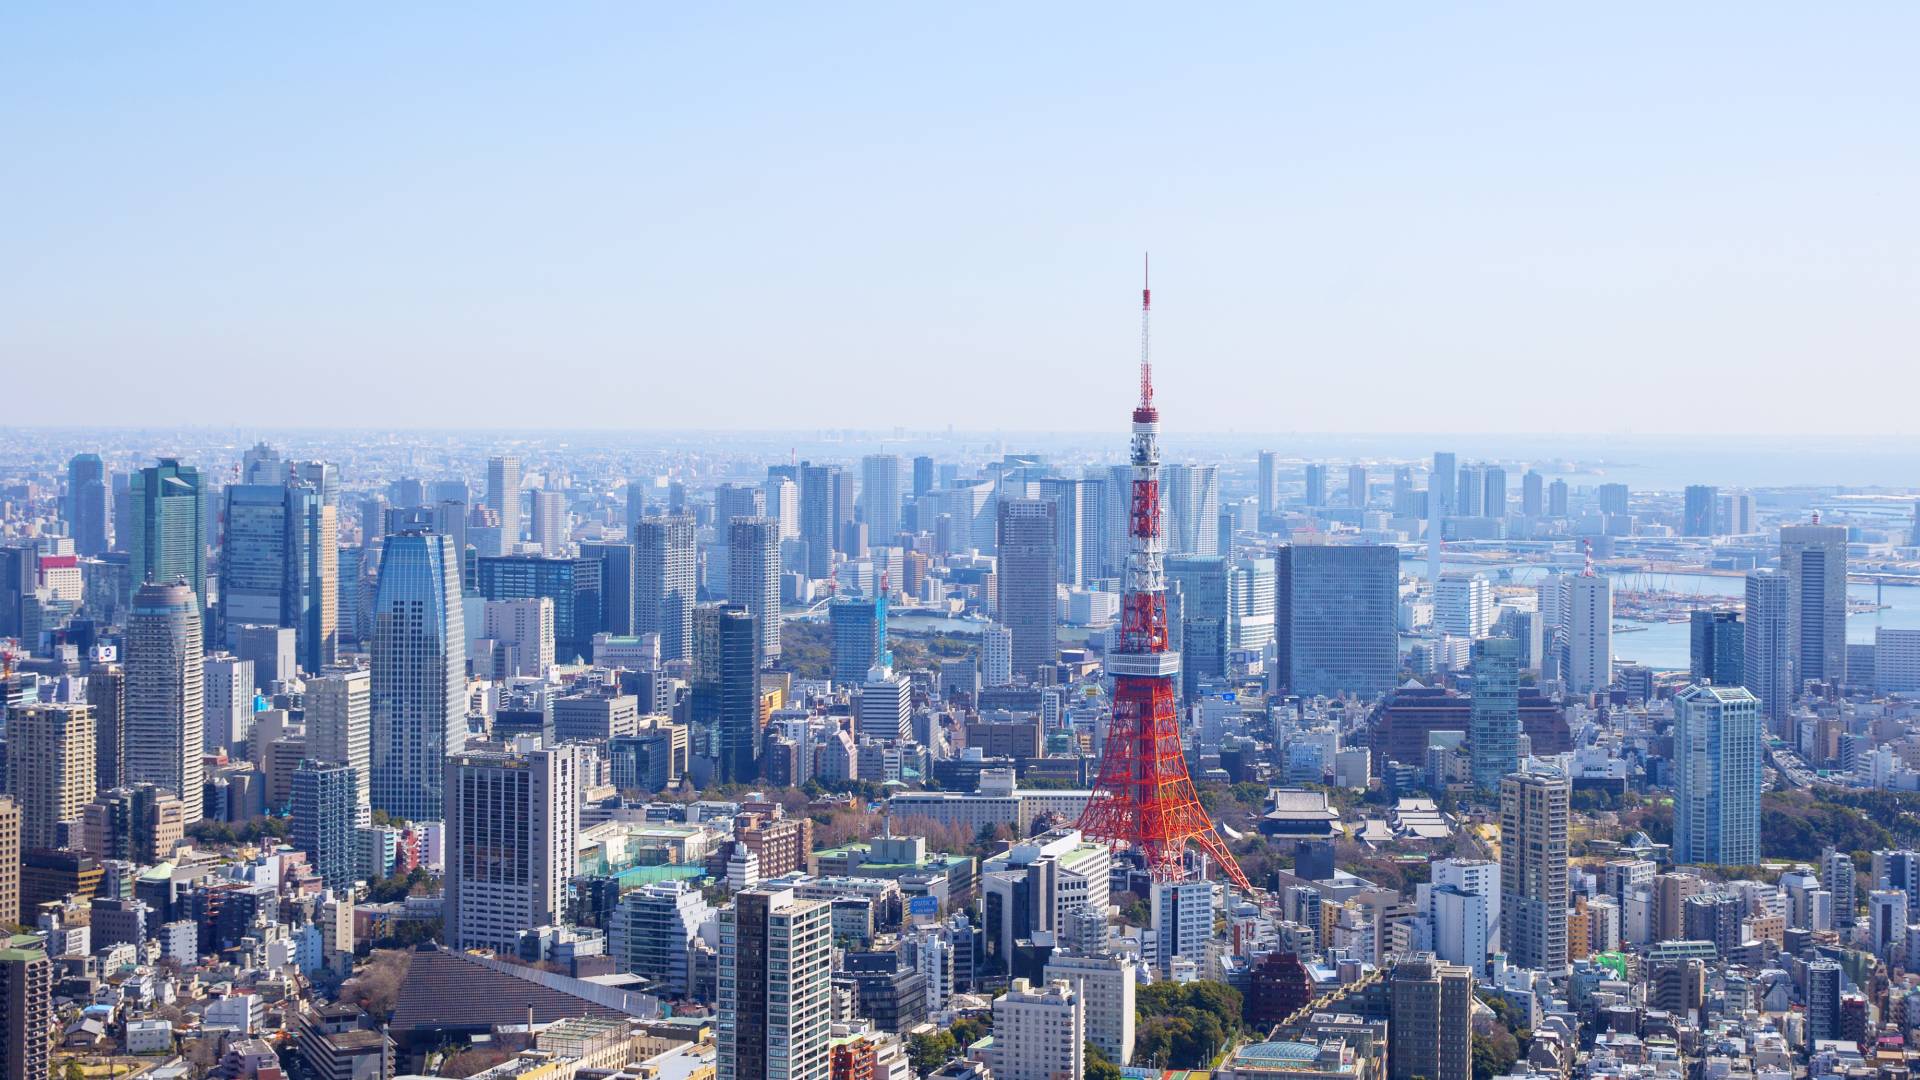 the Tokyo Tower and tokyo skyscrappers